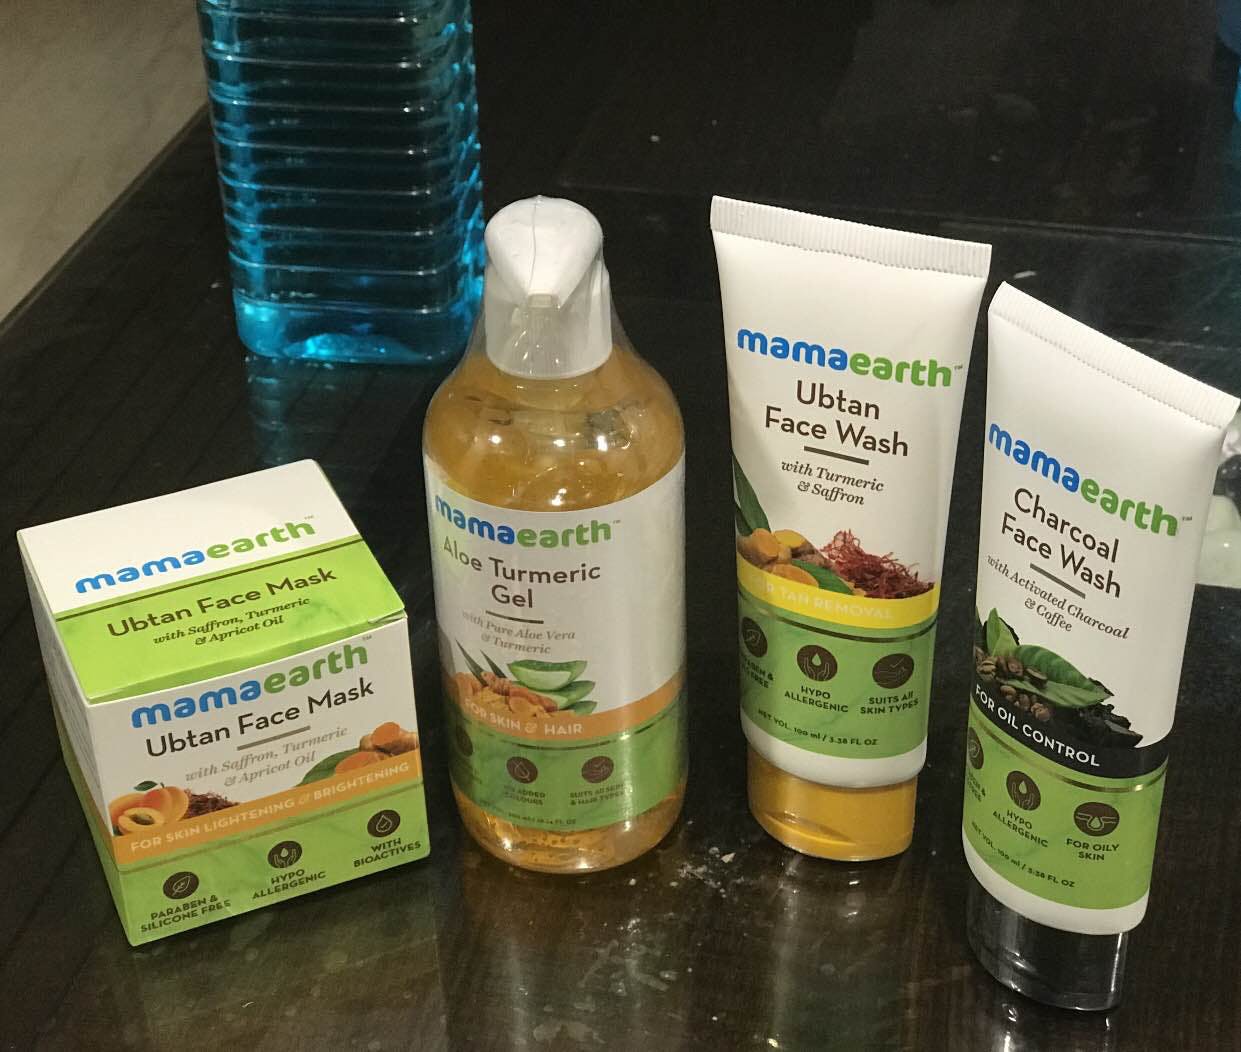 mamaearth products